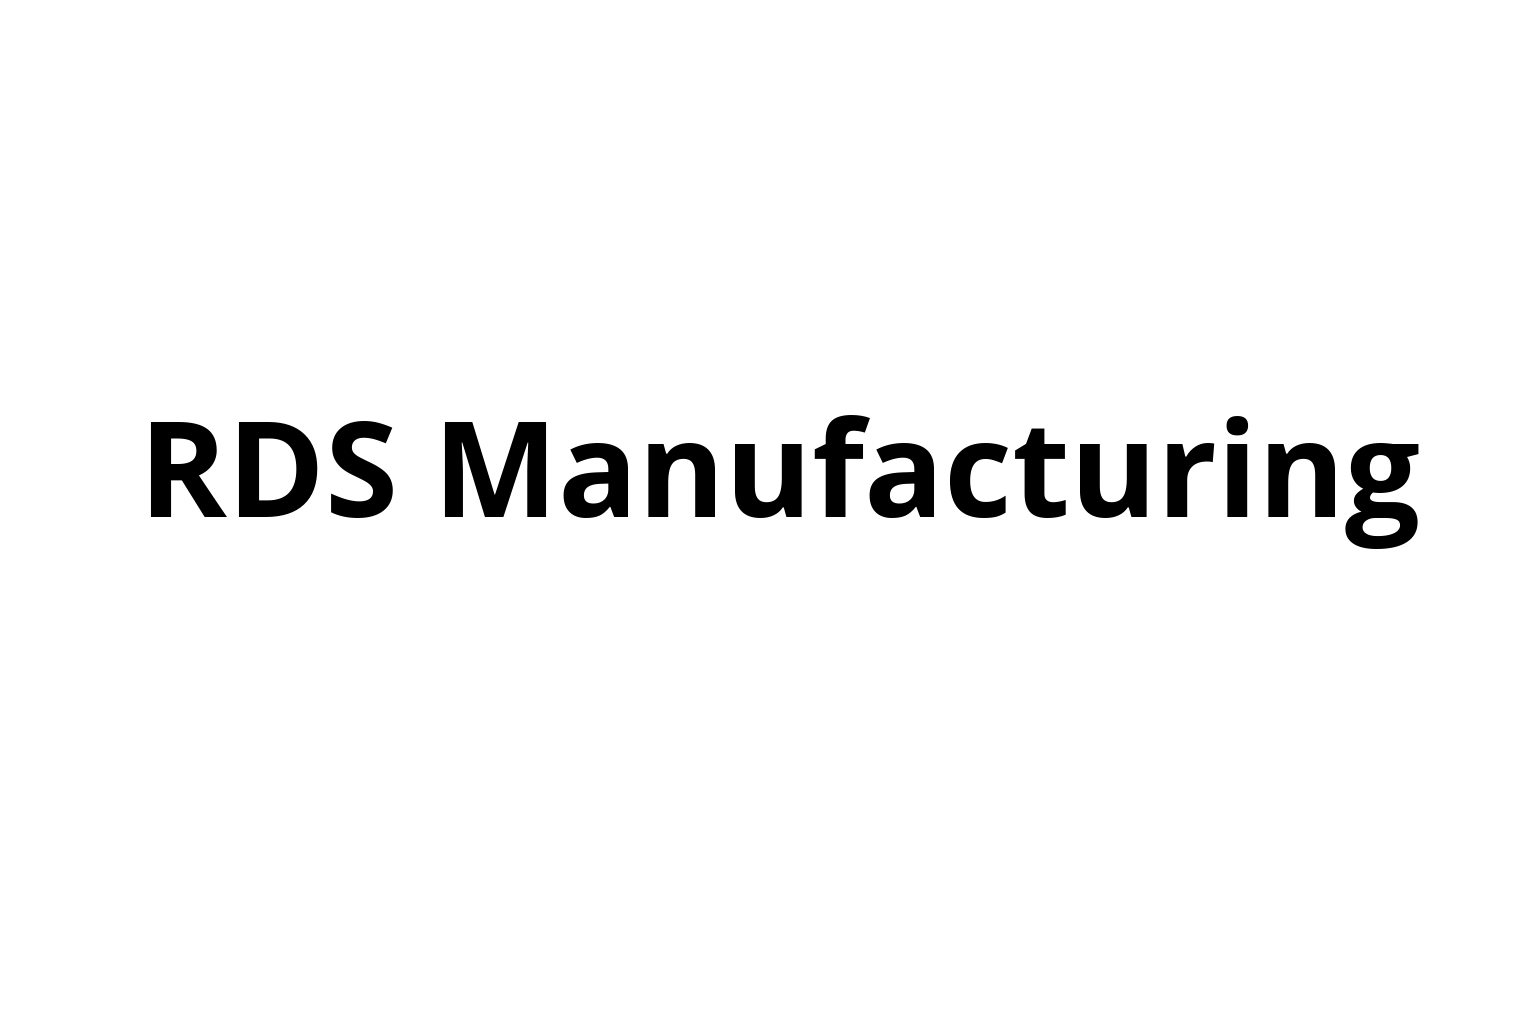 RDS Manufacturing